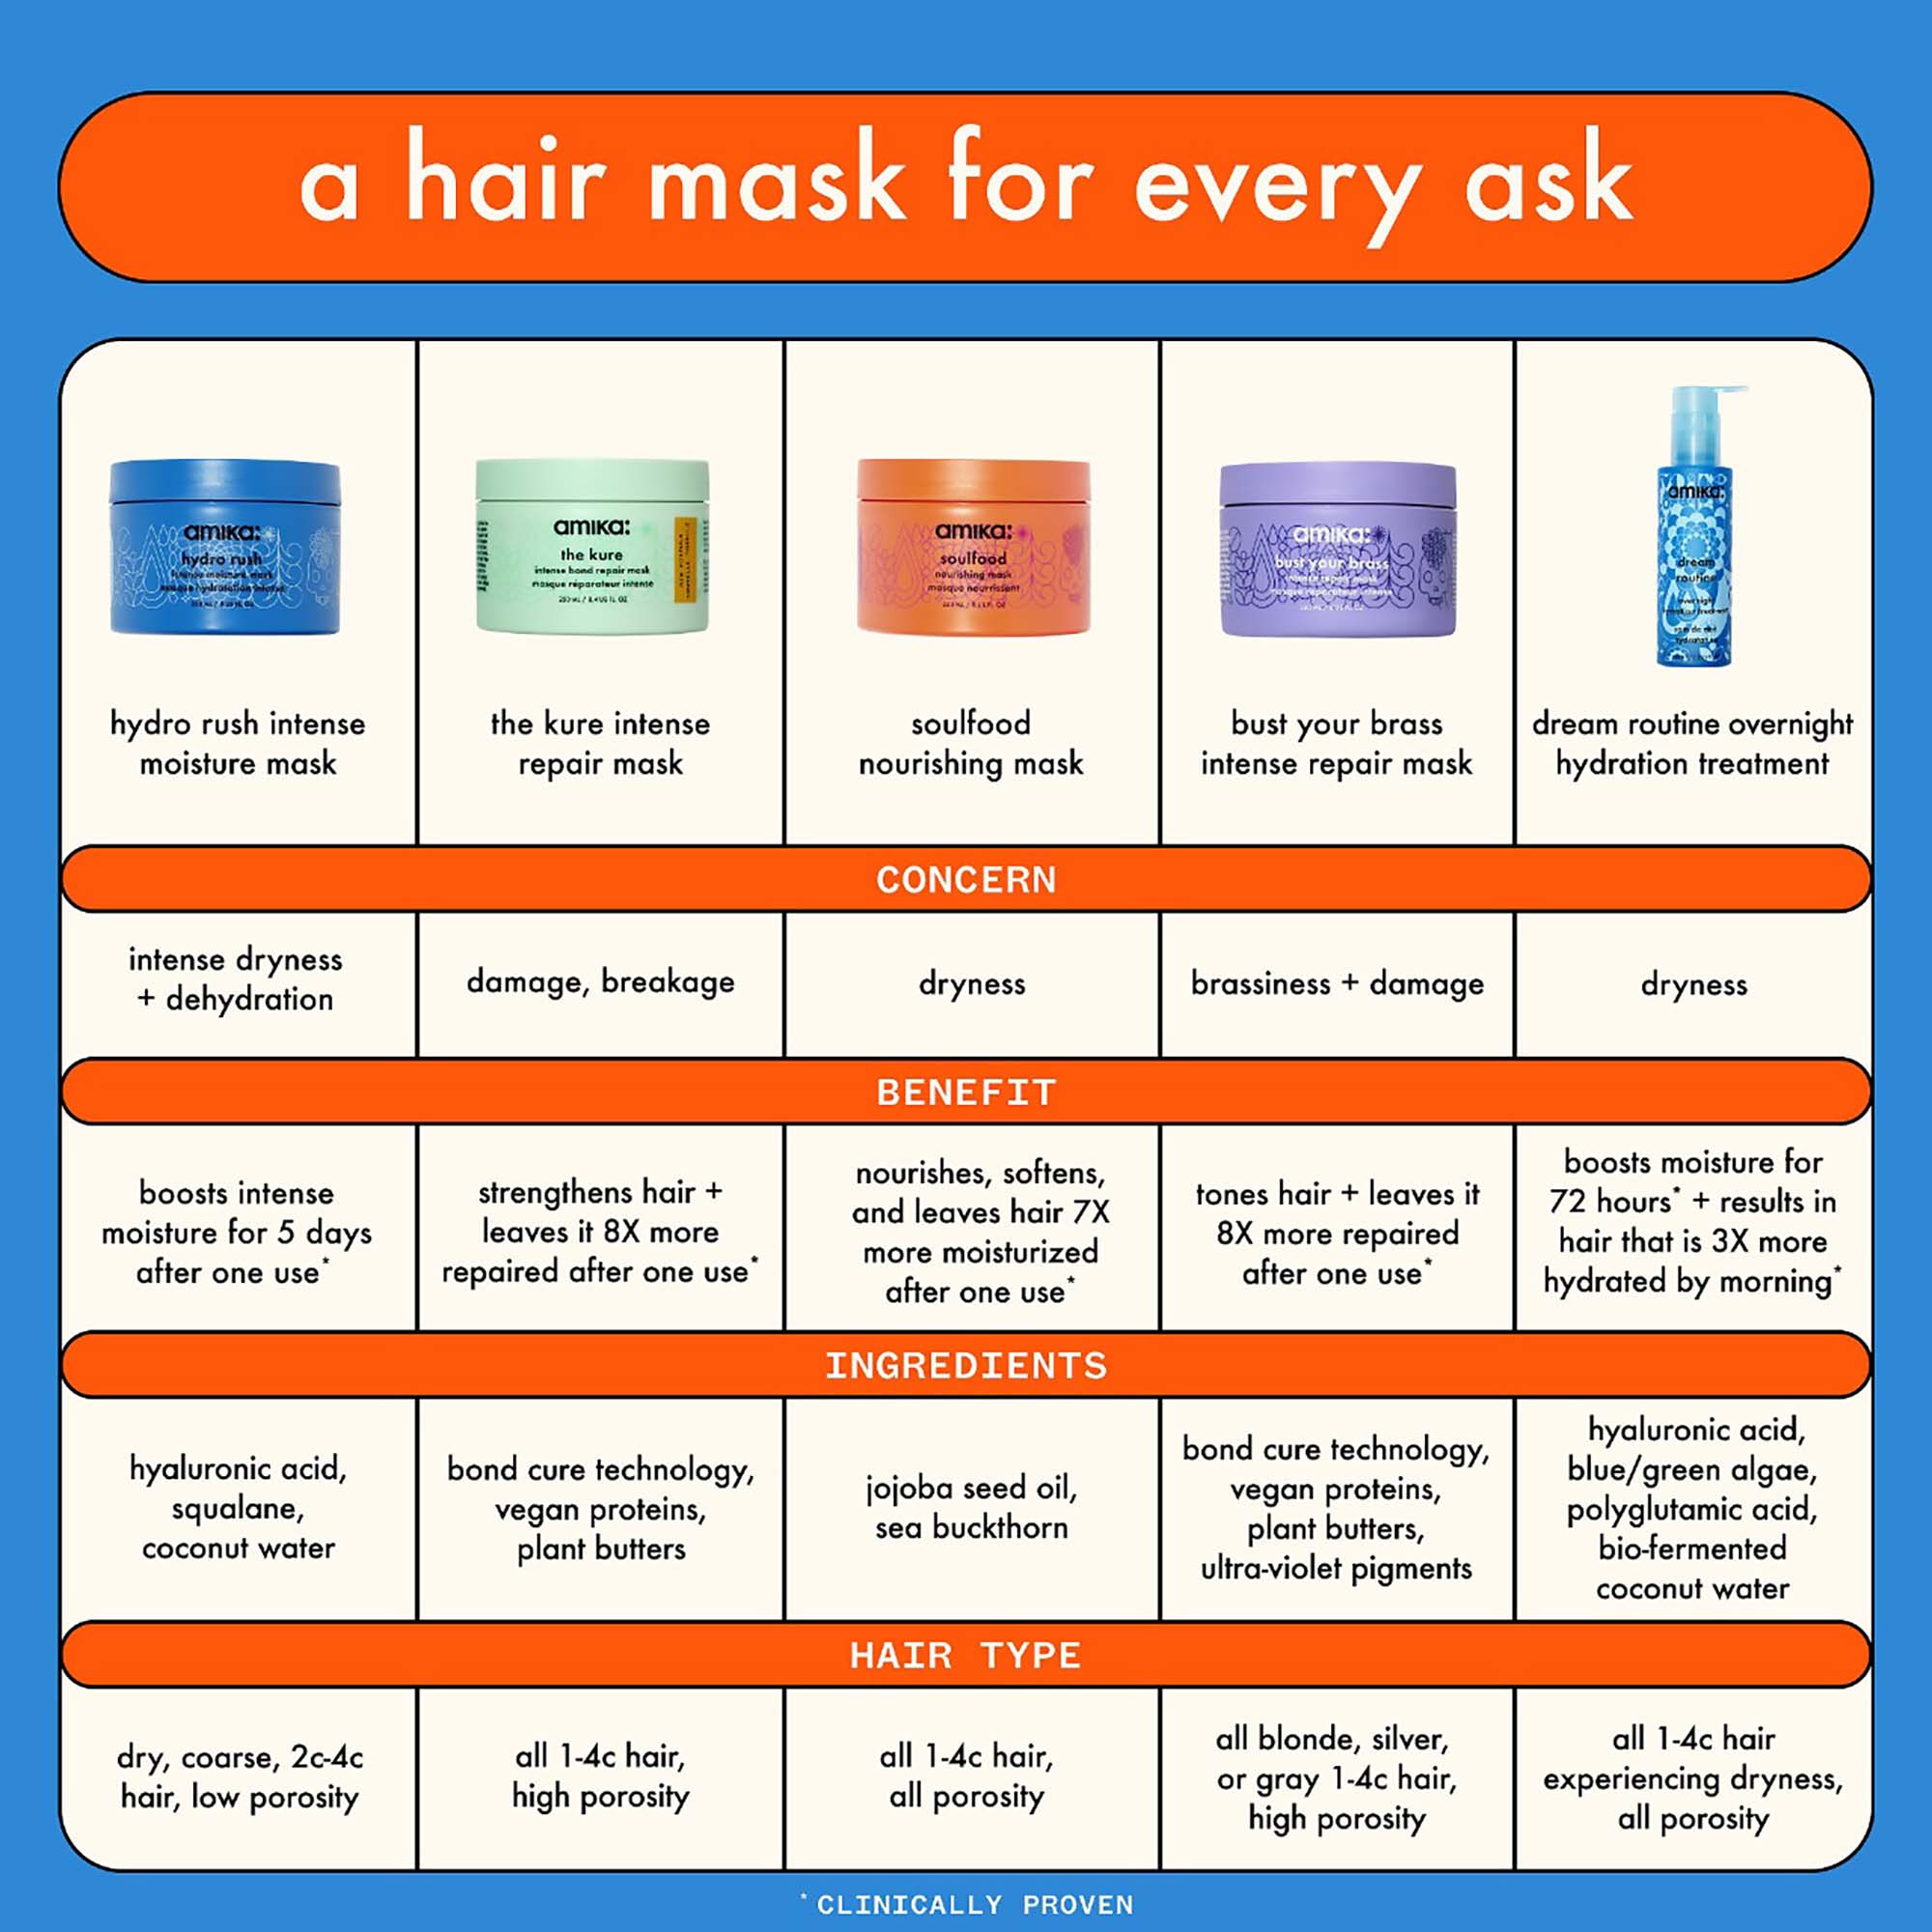 everything you need to know about our new liquid hair mask – Milkshake USA